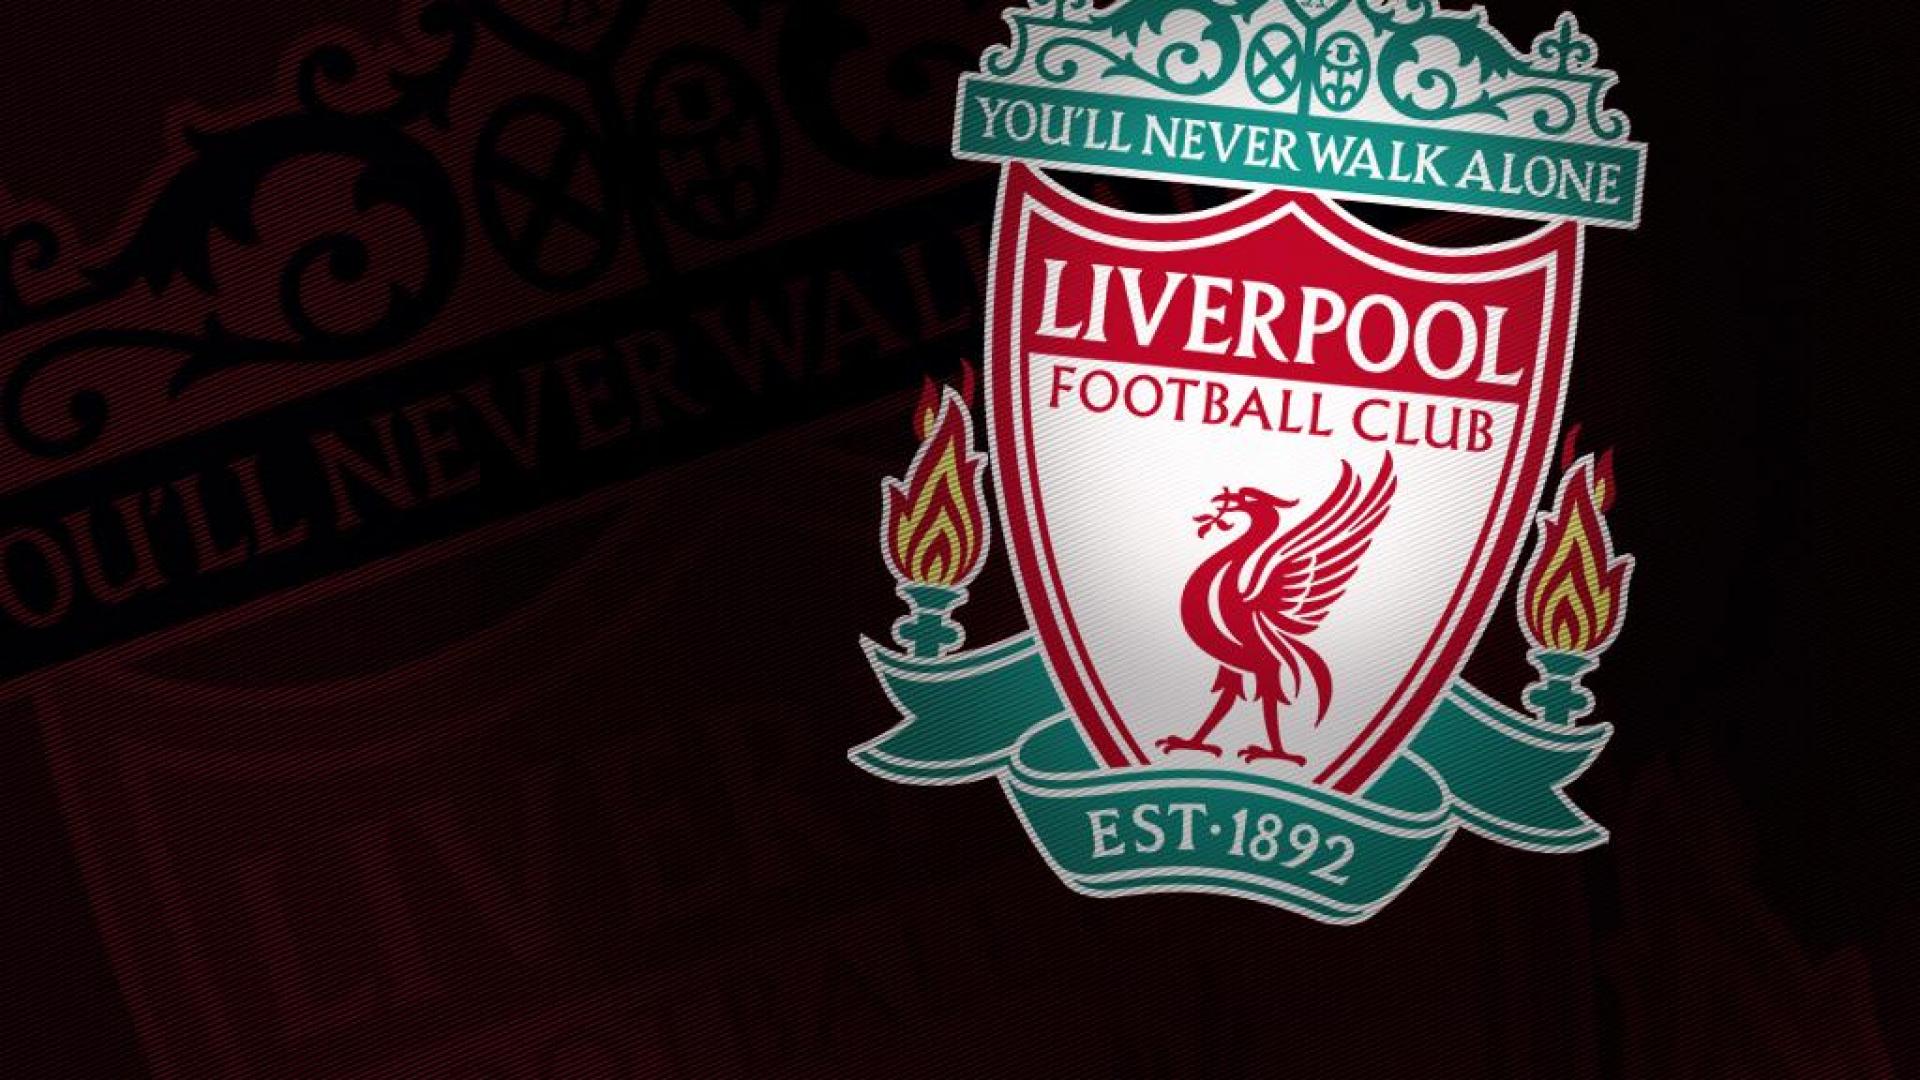 Liverpool - (#81718) - High Quality and Resolution Wallpapers on ...